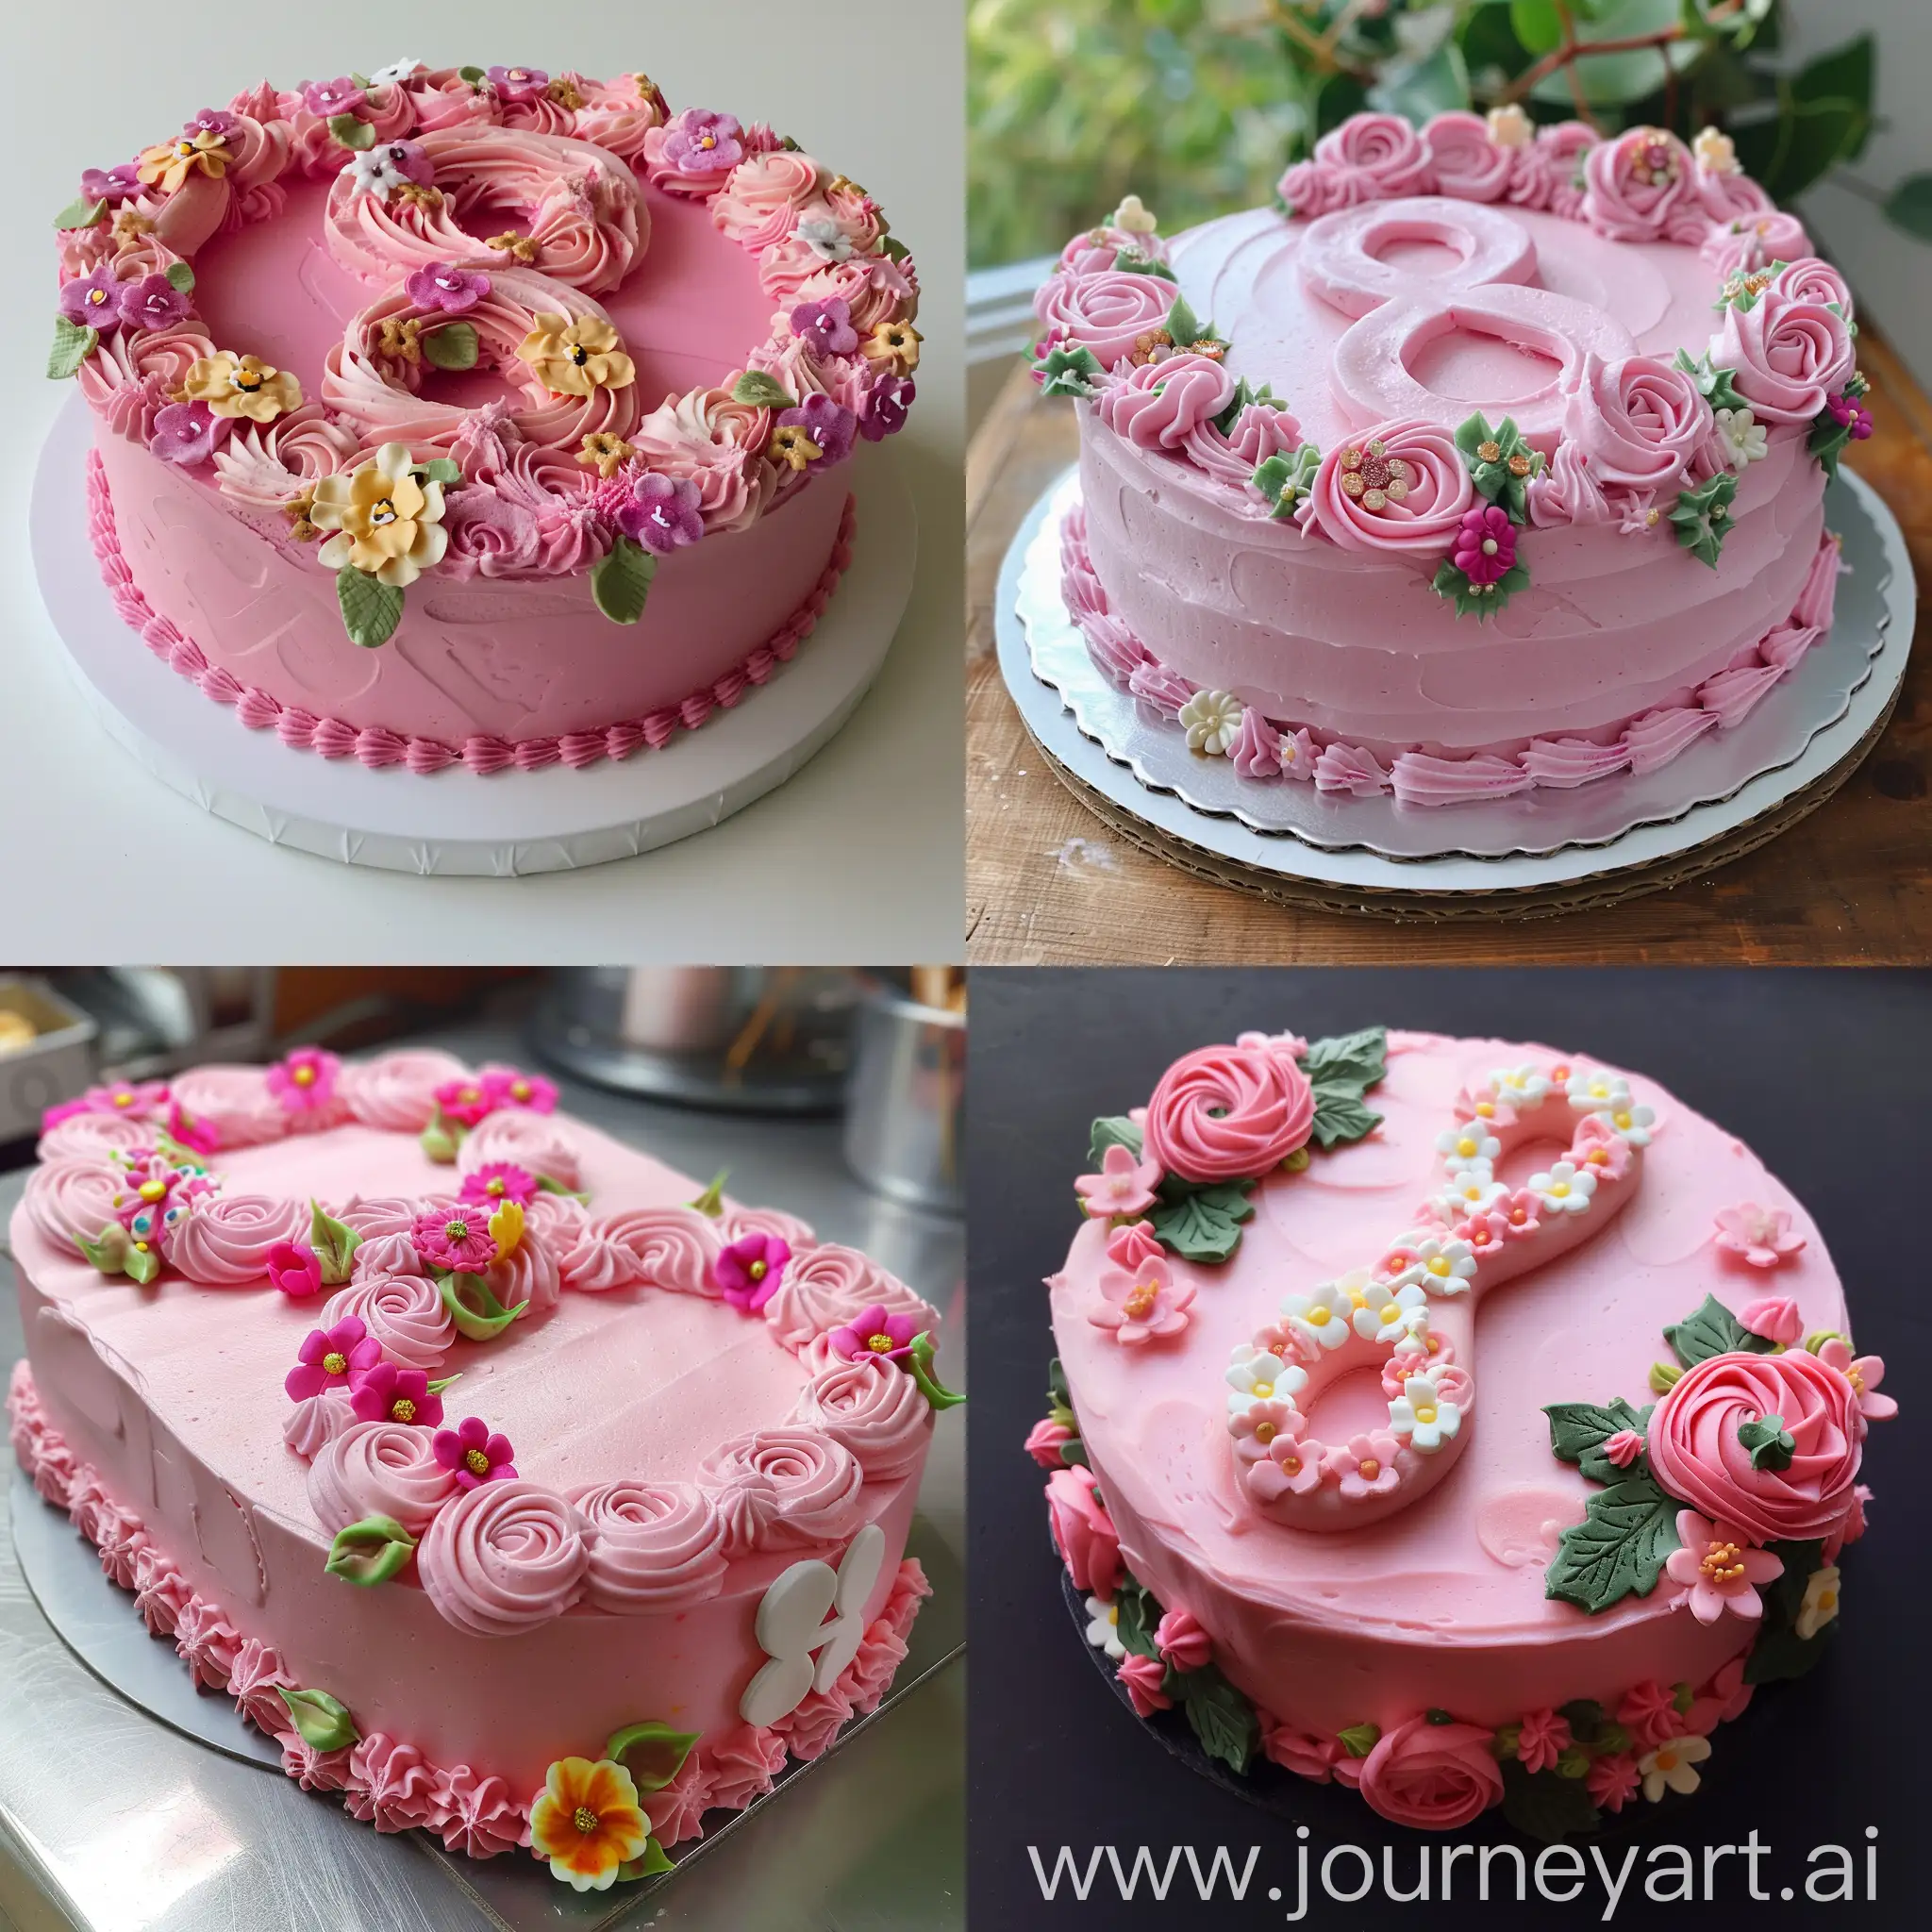 Delicate-Pink-EightShaped-Cake-with-Intricate-Flower-Decorations